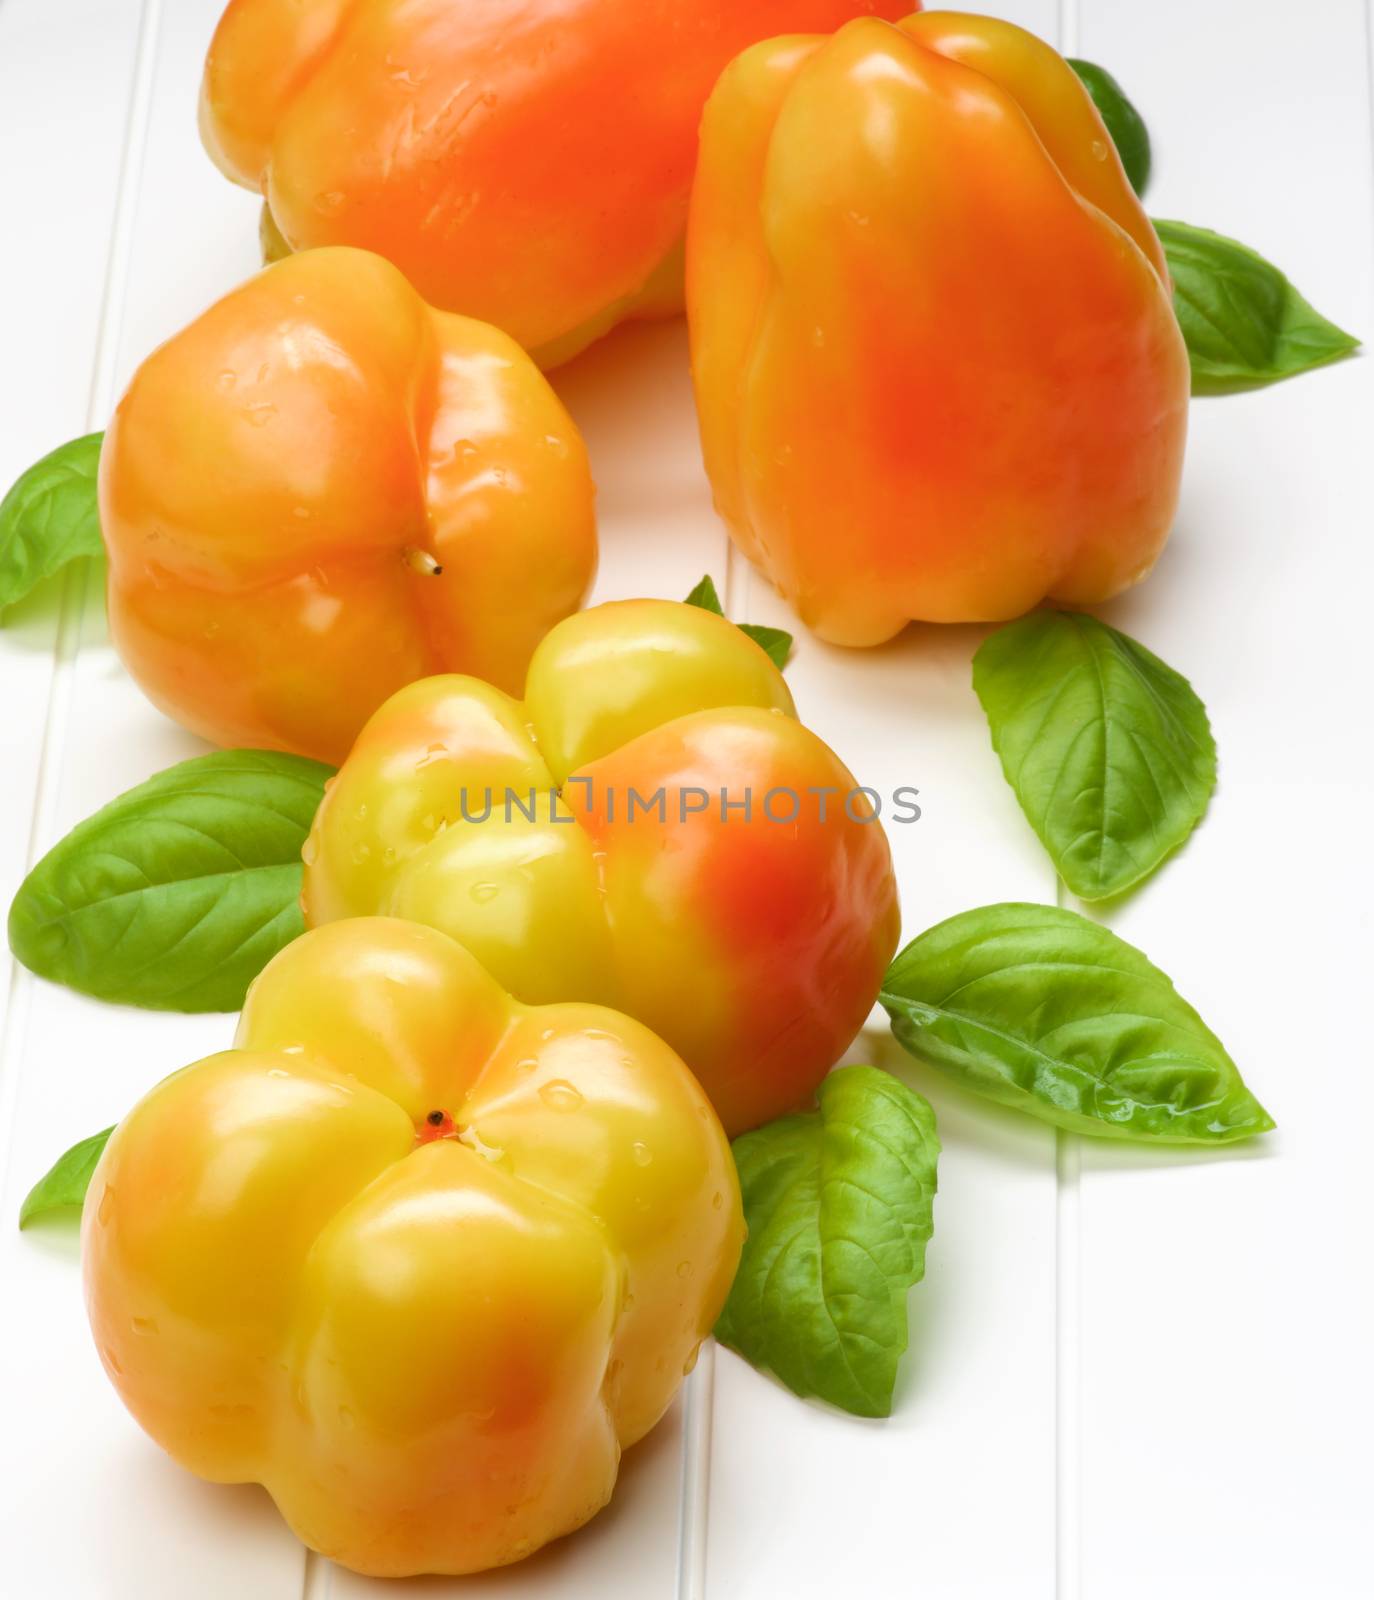 Yellow and Orange Bell Peppers by zhekos